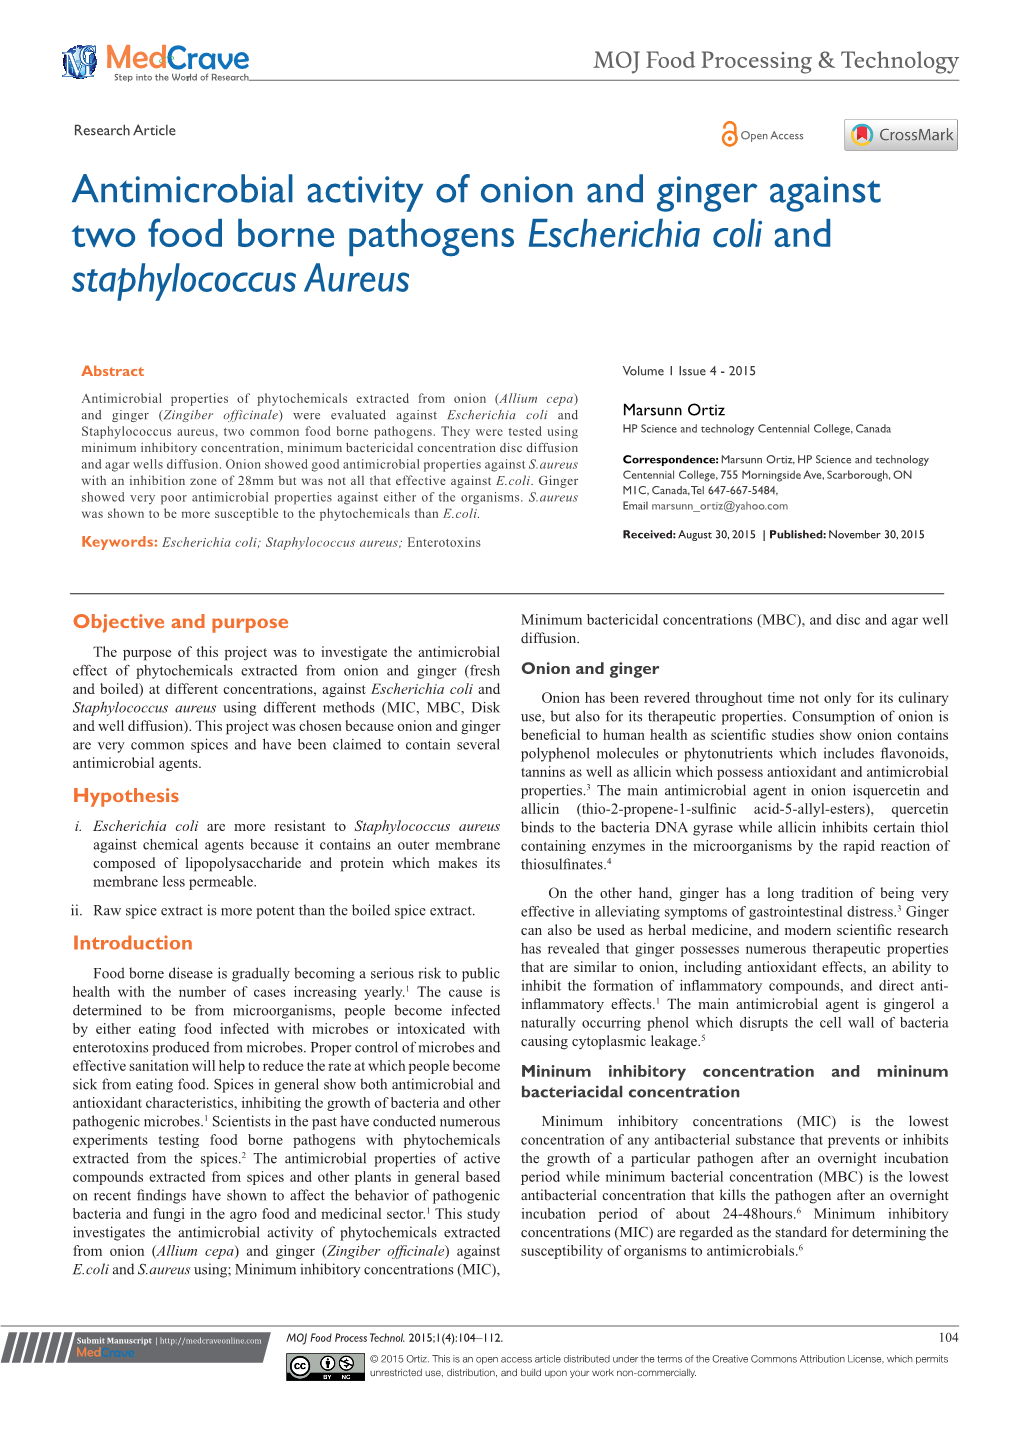 Antimicrobial Activity of Onion and Ginger Against Two Food Borne Pathogens Escherichia Coli and Staphylococcus Aureus